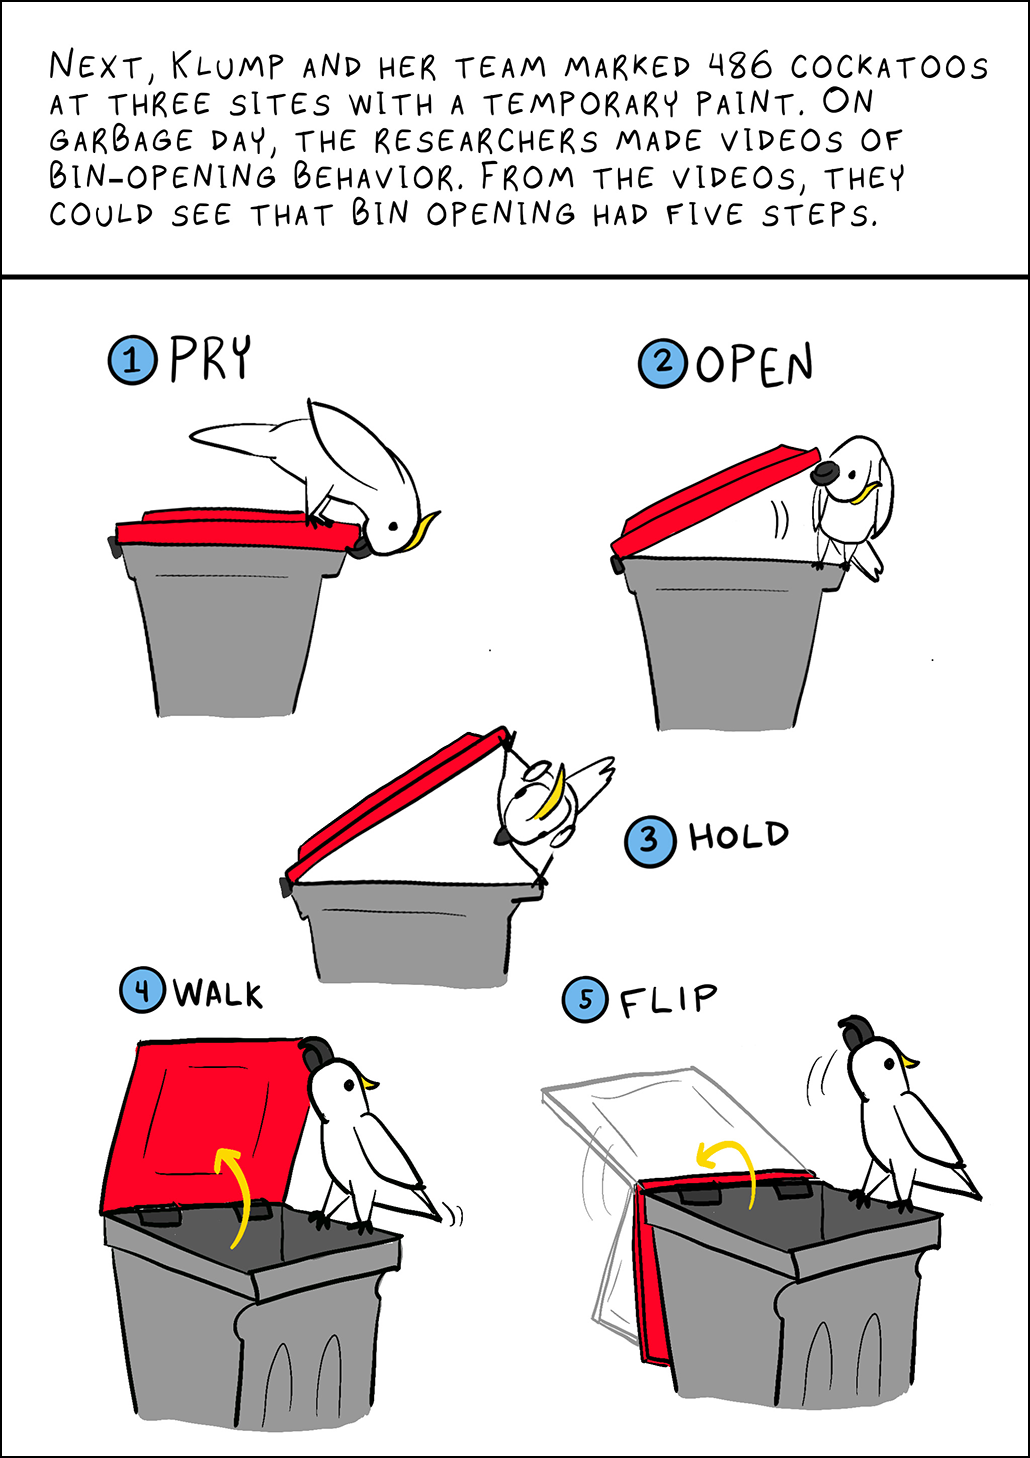 Text: Next, Klump and her team marked 486 cockatoos at three sites with a temporary paint. On garbage day, the researchers made videos of bin-opening behavior. From the videos, they could see that bin opening had five steps. Image: A cockatoo opening a trashcan in 5 steps. 1. Pry. 2. Open. 3. Hold. 4. Walk. 5. Flip.